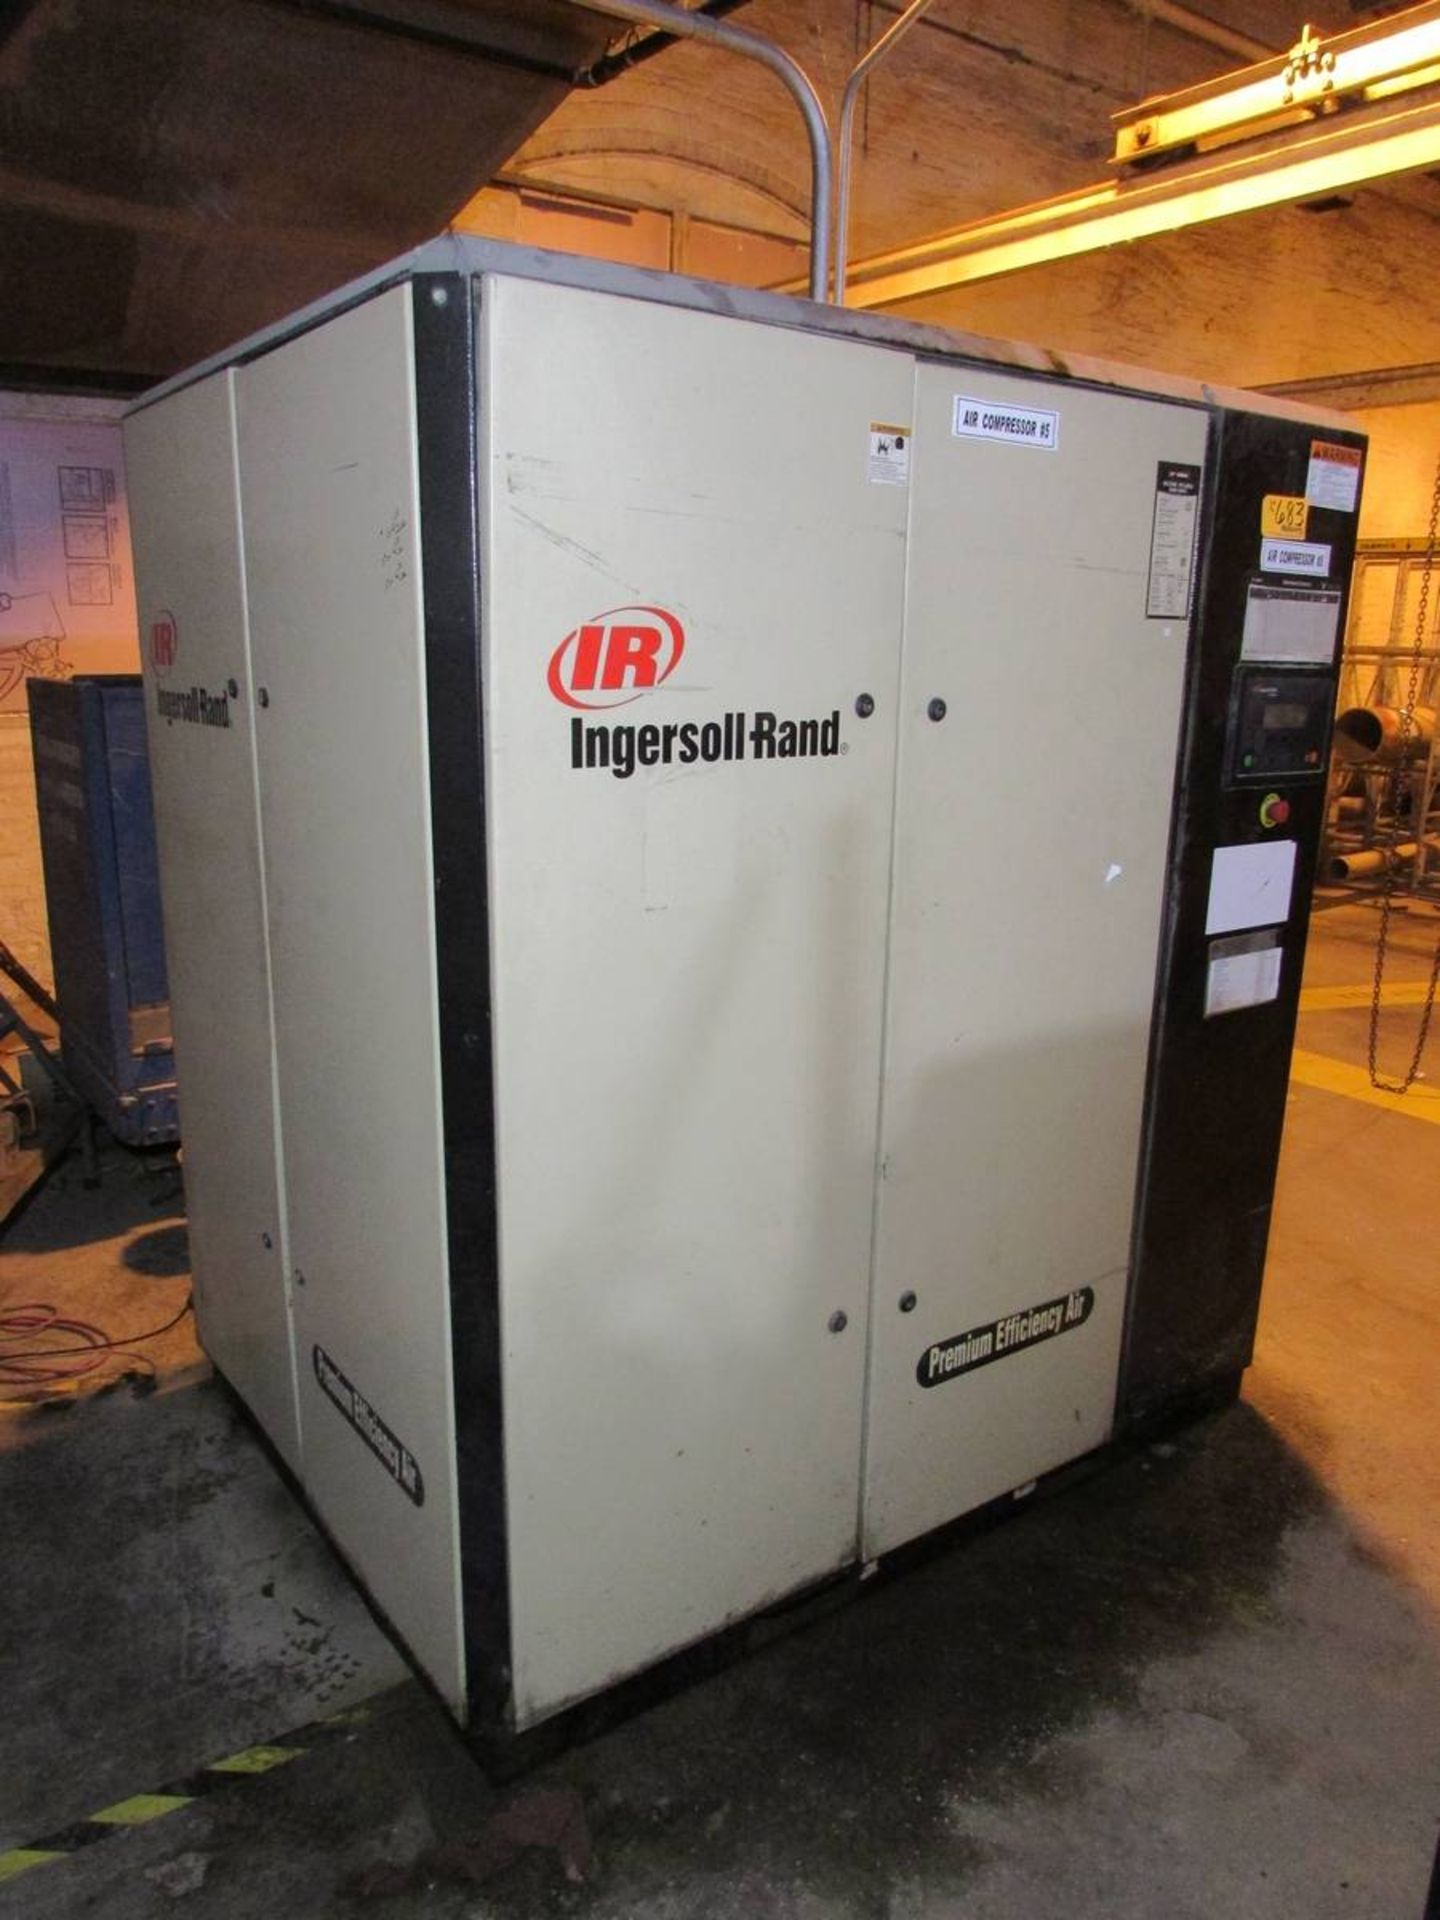 Ingersoll-Rand IRN100H-CC 100 HP Rotary Screw Air Compressor - Image 6 of 8